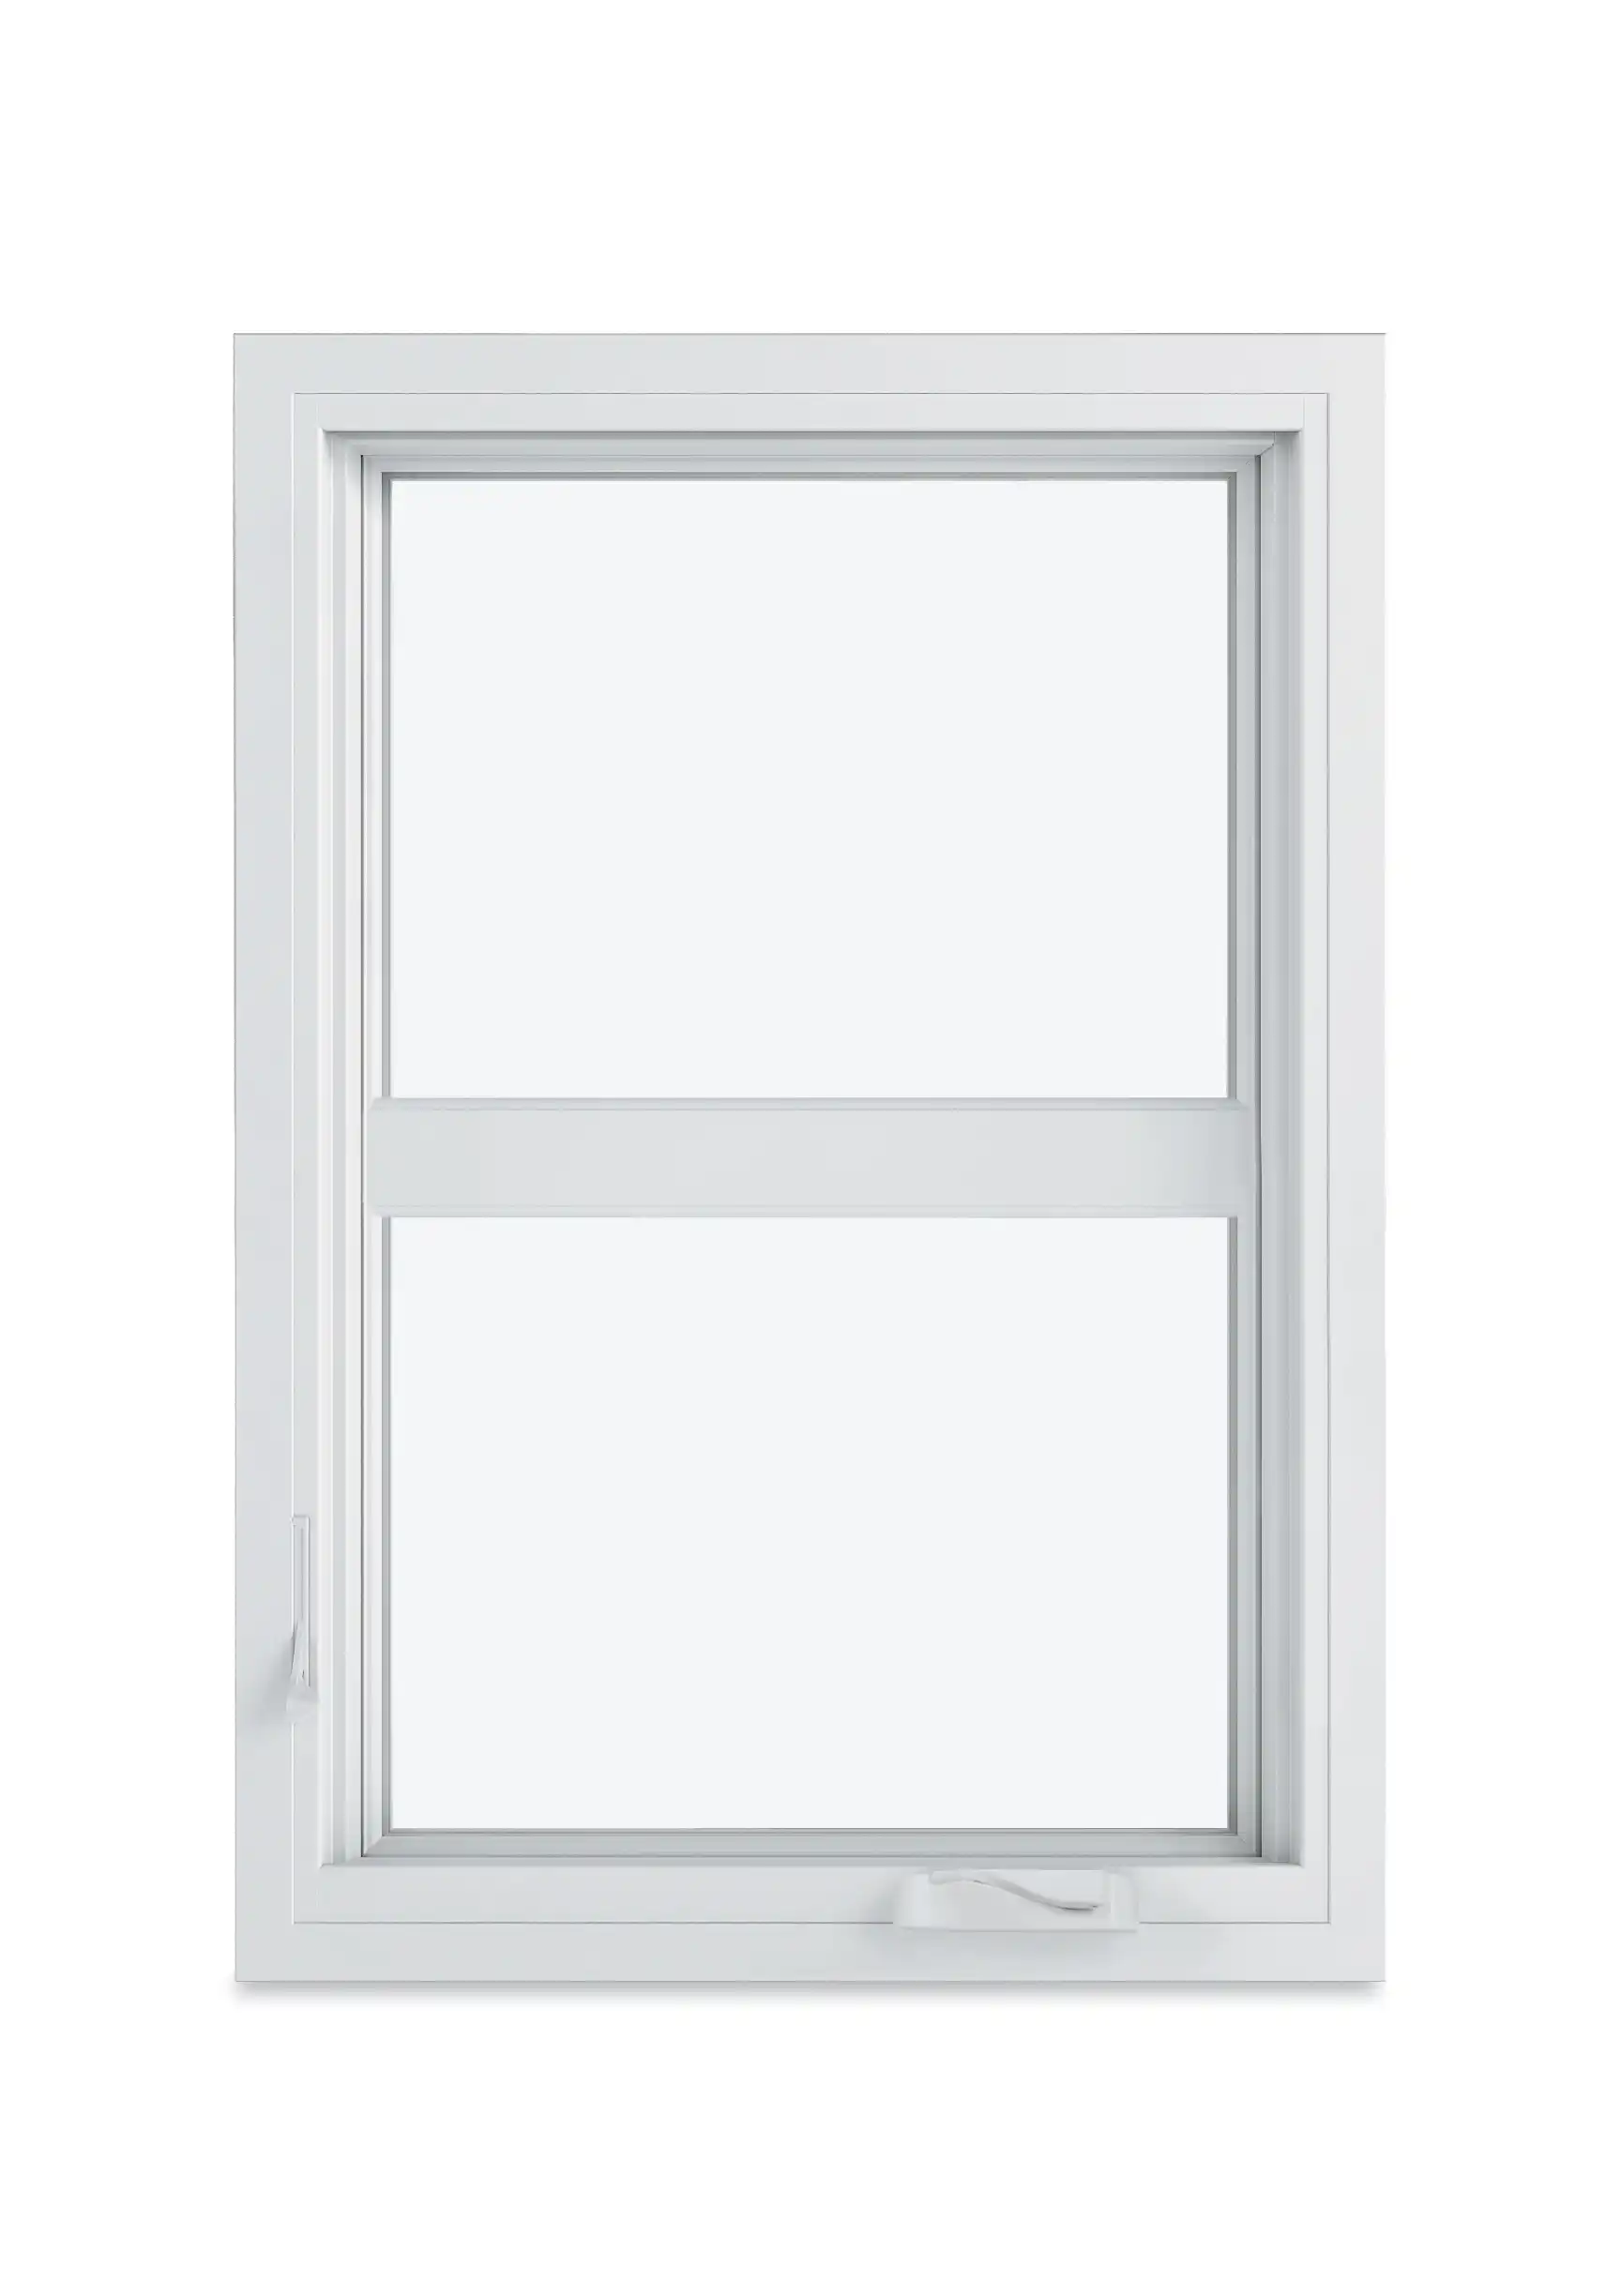 Image of a white Marvin Replacement Casement window with a simulated check rail to mimic a double hung window look.